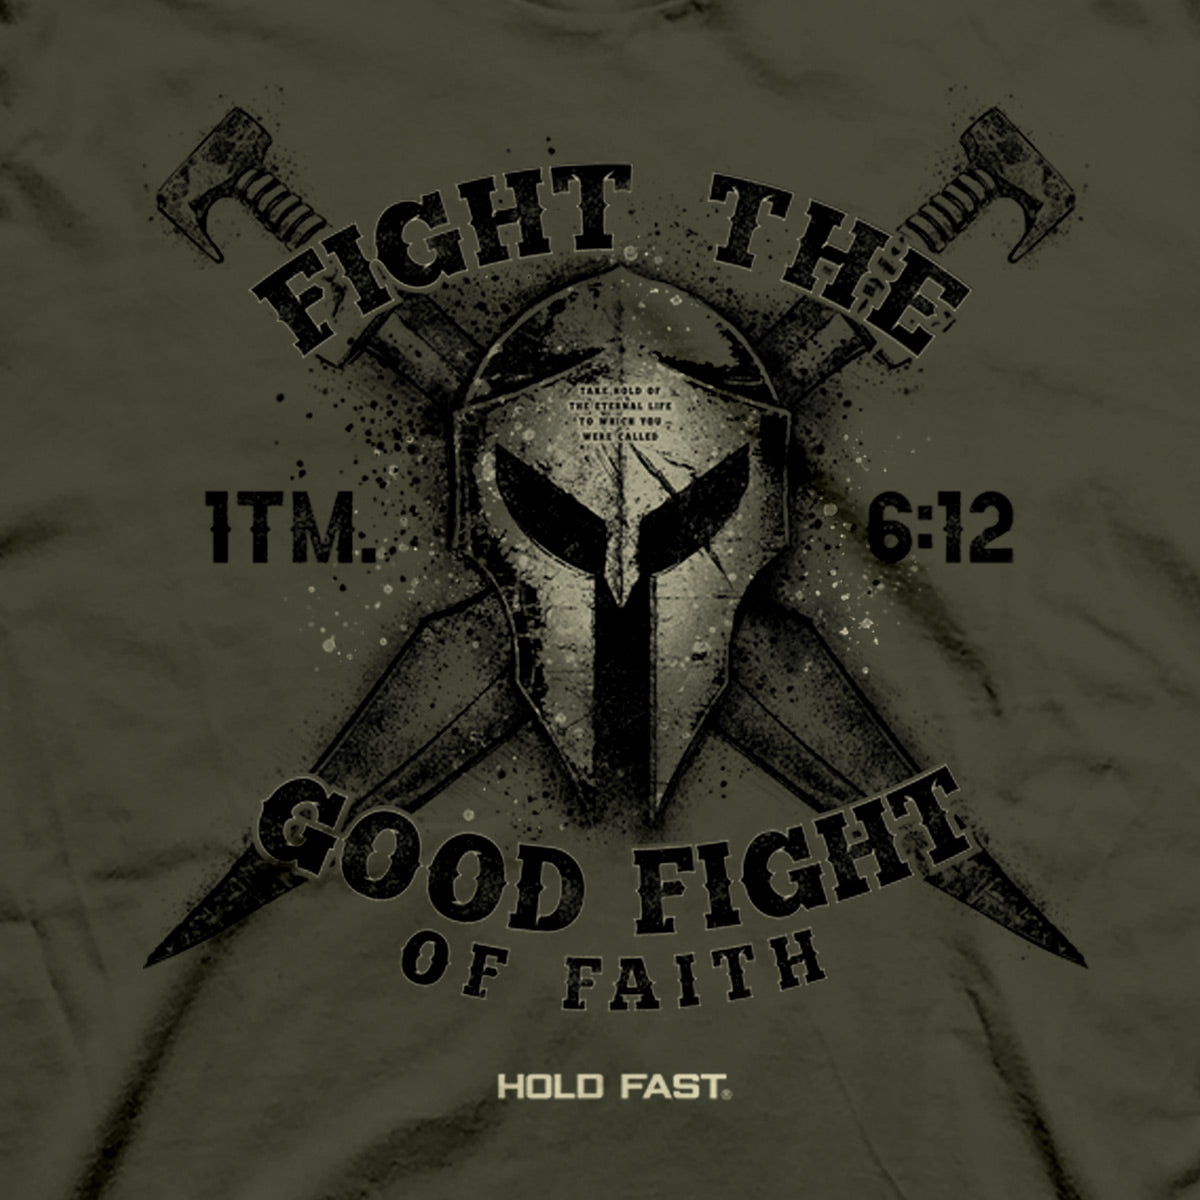 HOLD FAST Mens T-Shirt The Good Fight